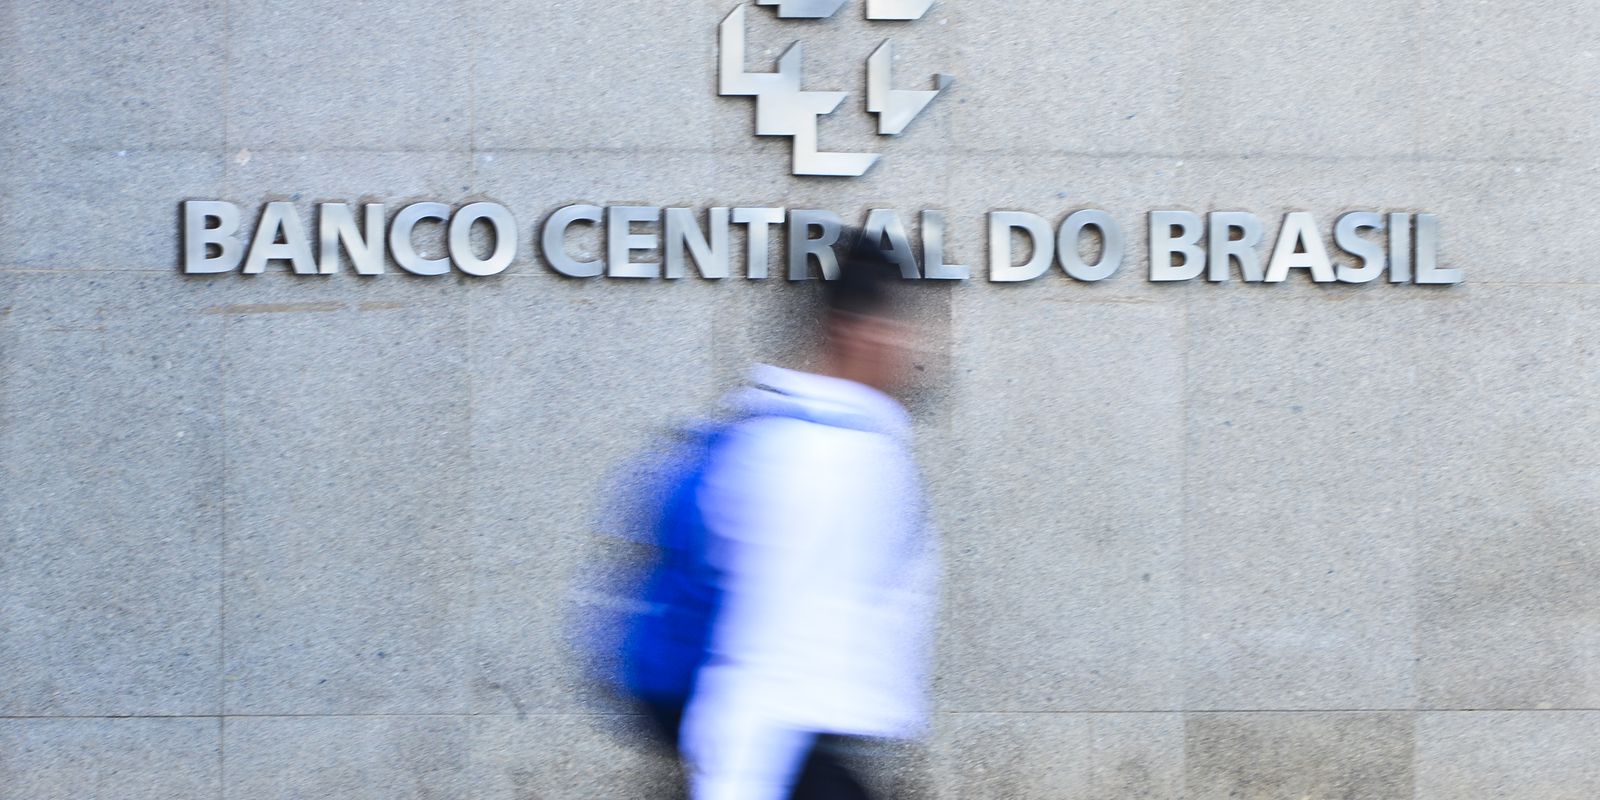 Temporary fiscal stimulus pressures inflation, says Central Bank